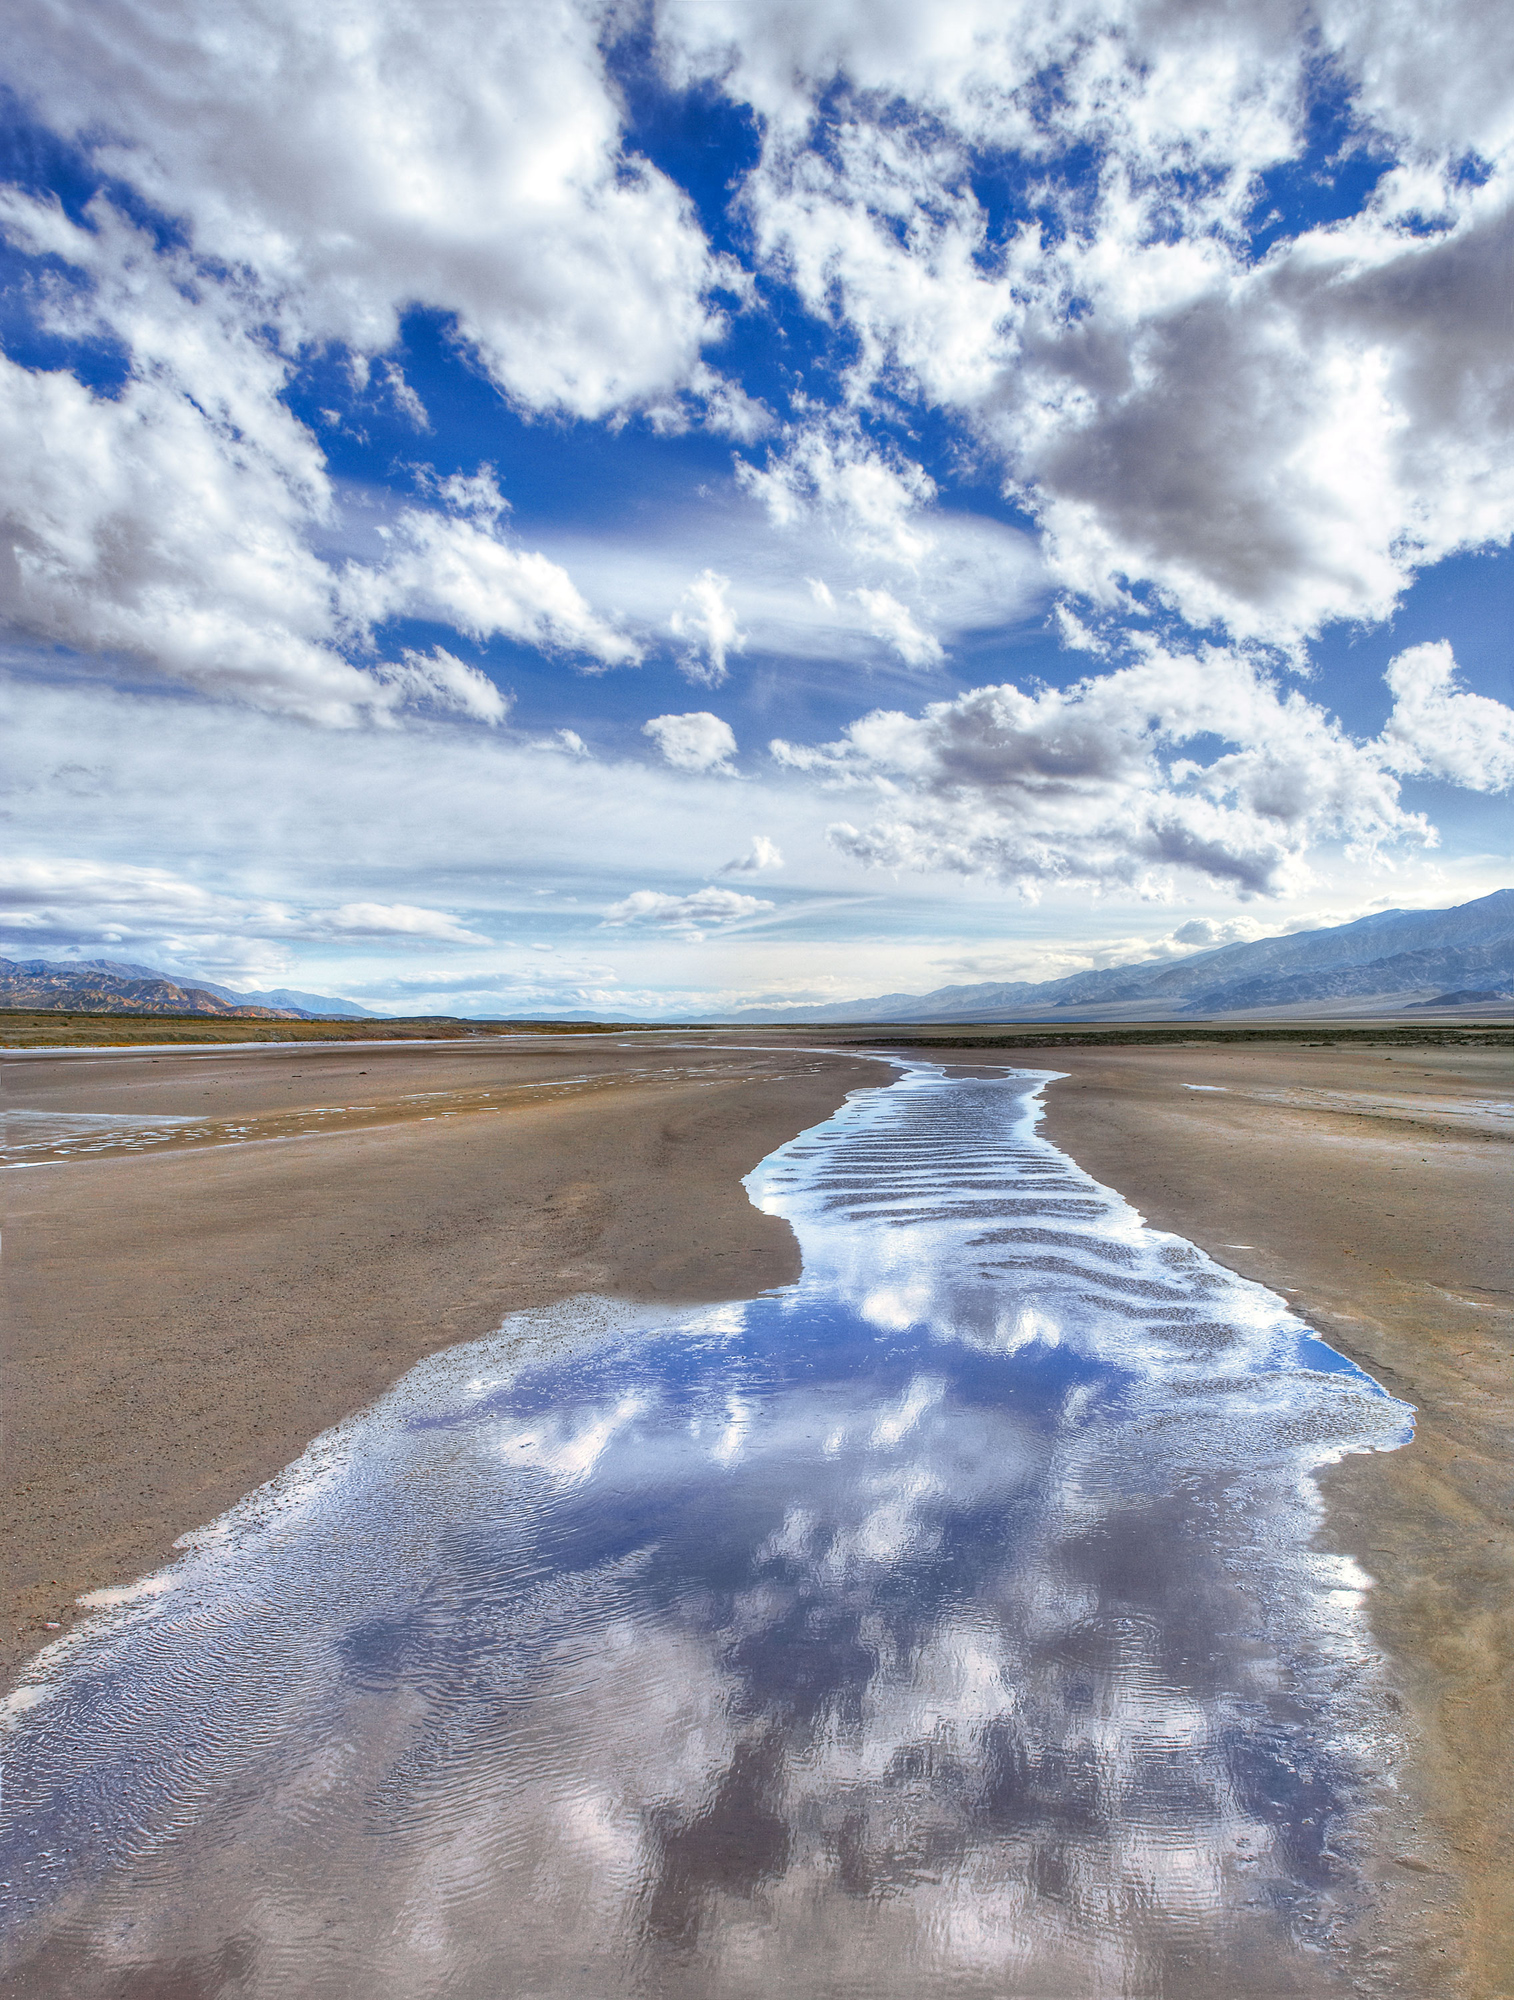 Playa reflections, Death Valley